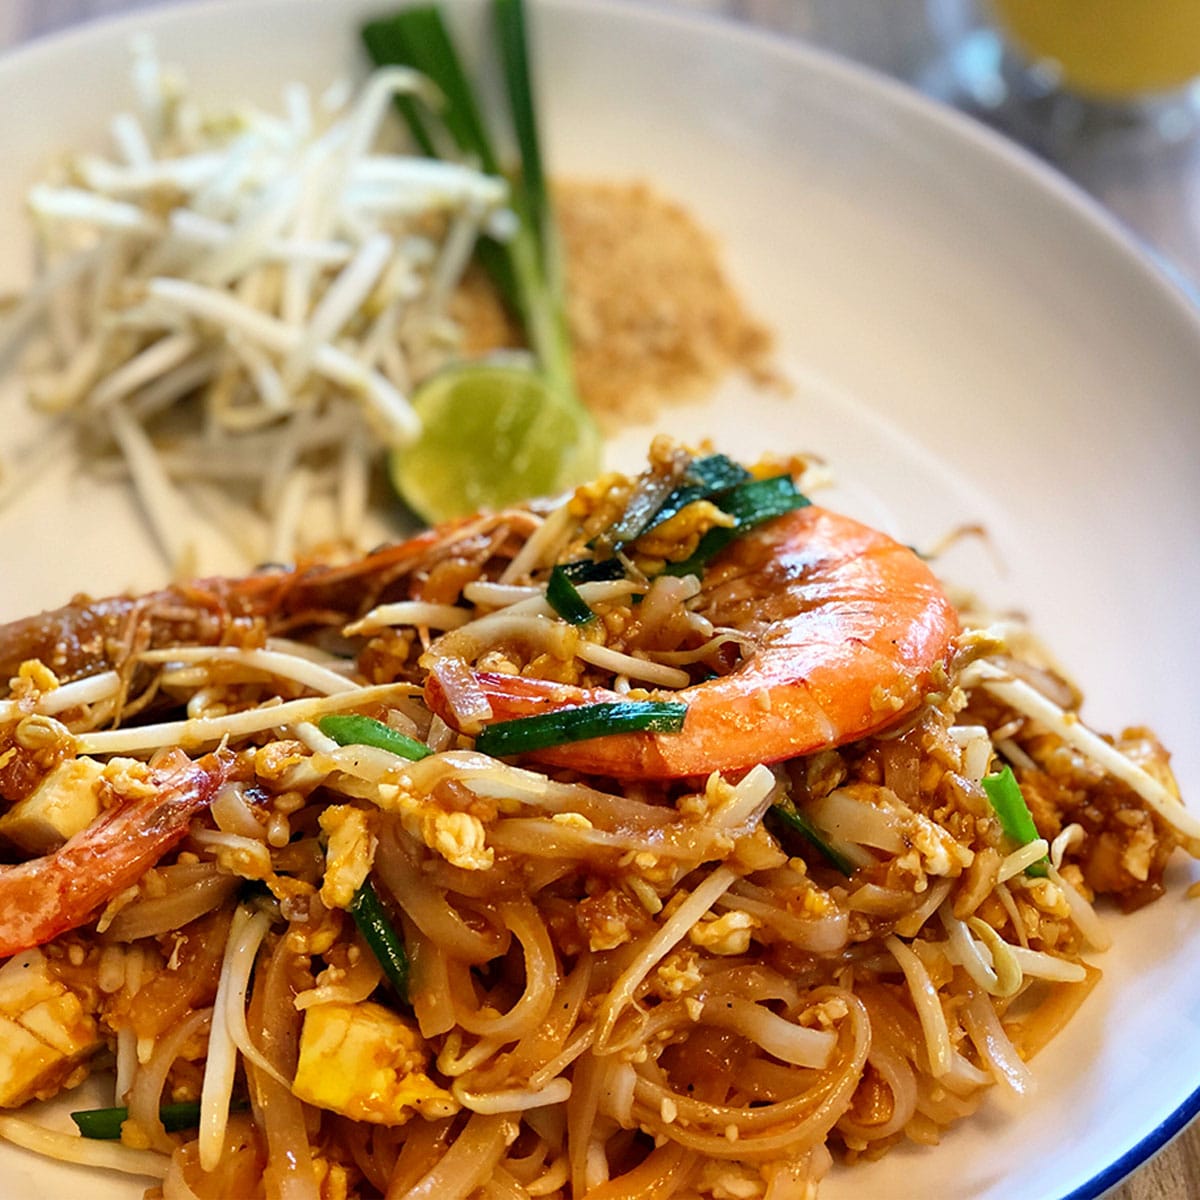 Which do you prefer: Pad Thai vs Lo Mein? It’s a tough question, isn’t it? They both seem so delicious. But which is the better dish? Well, that all depends on what you’re looking for in a meal.